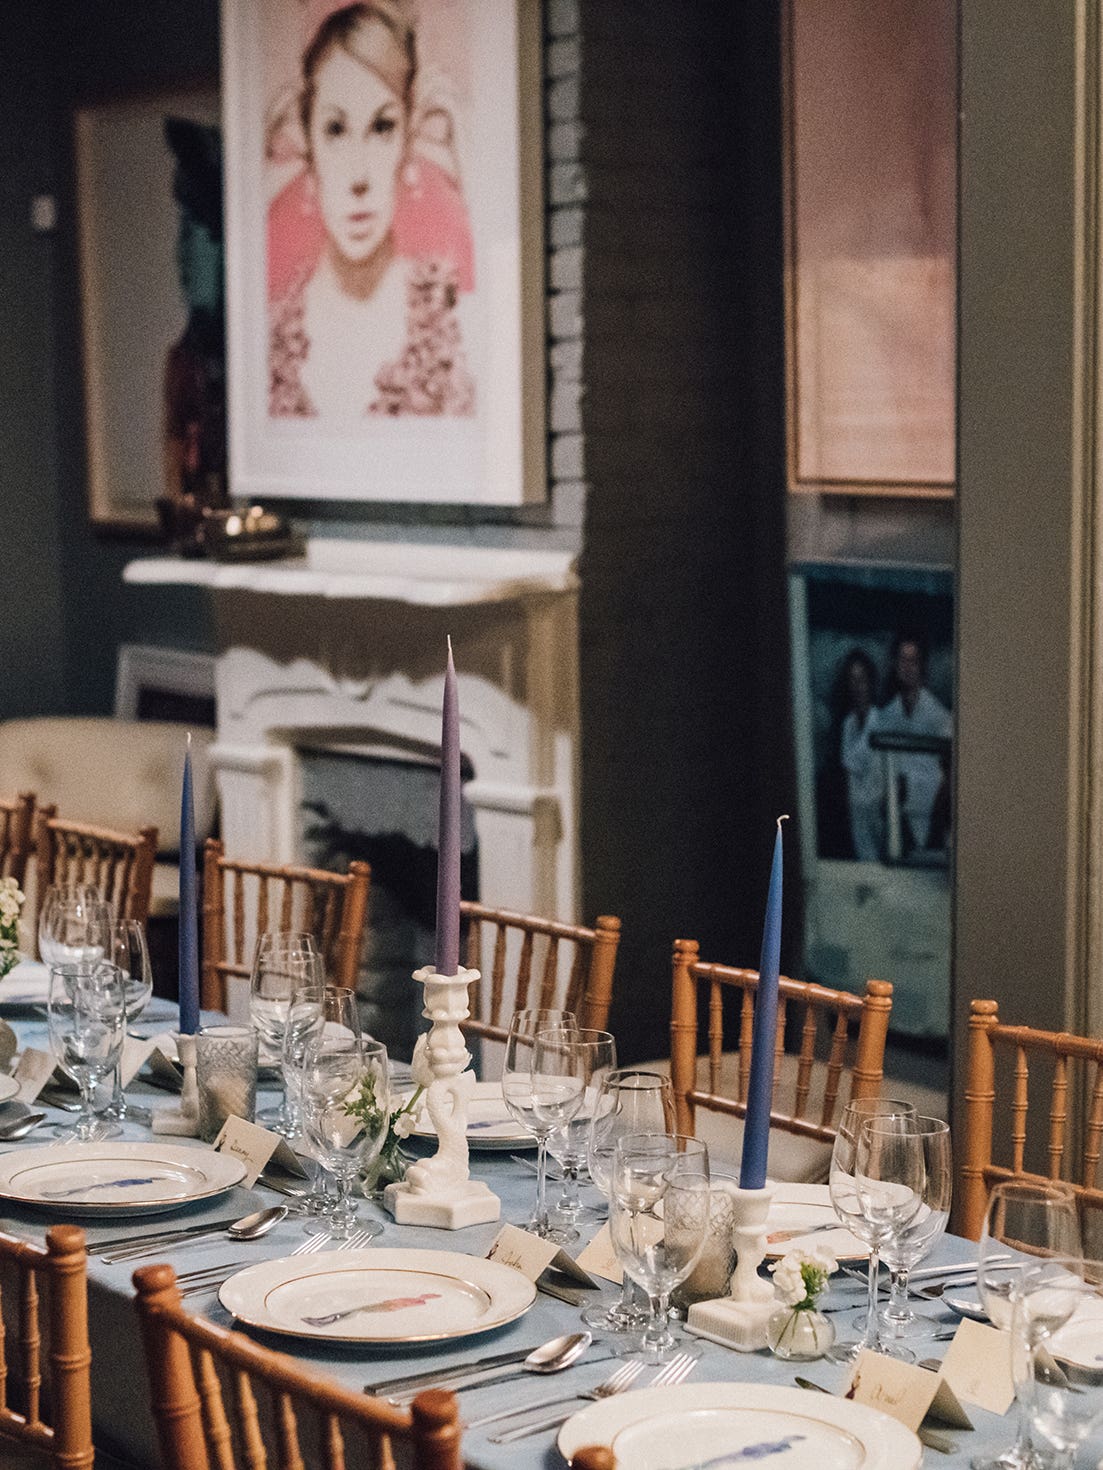 An Artist Threw a Dinner Party Inspired by Her Paintings